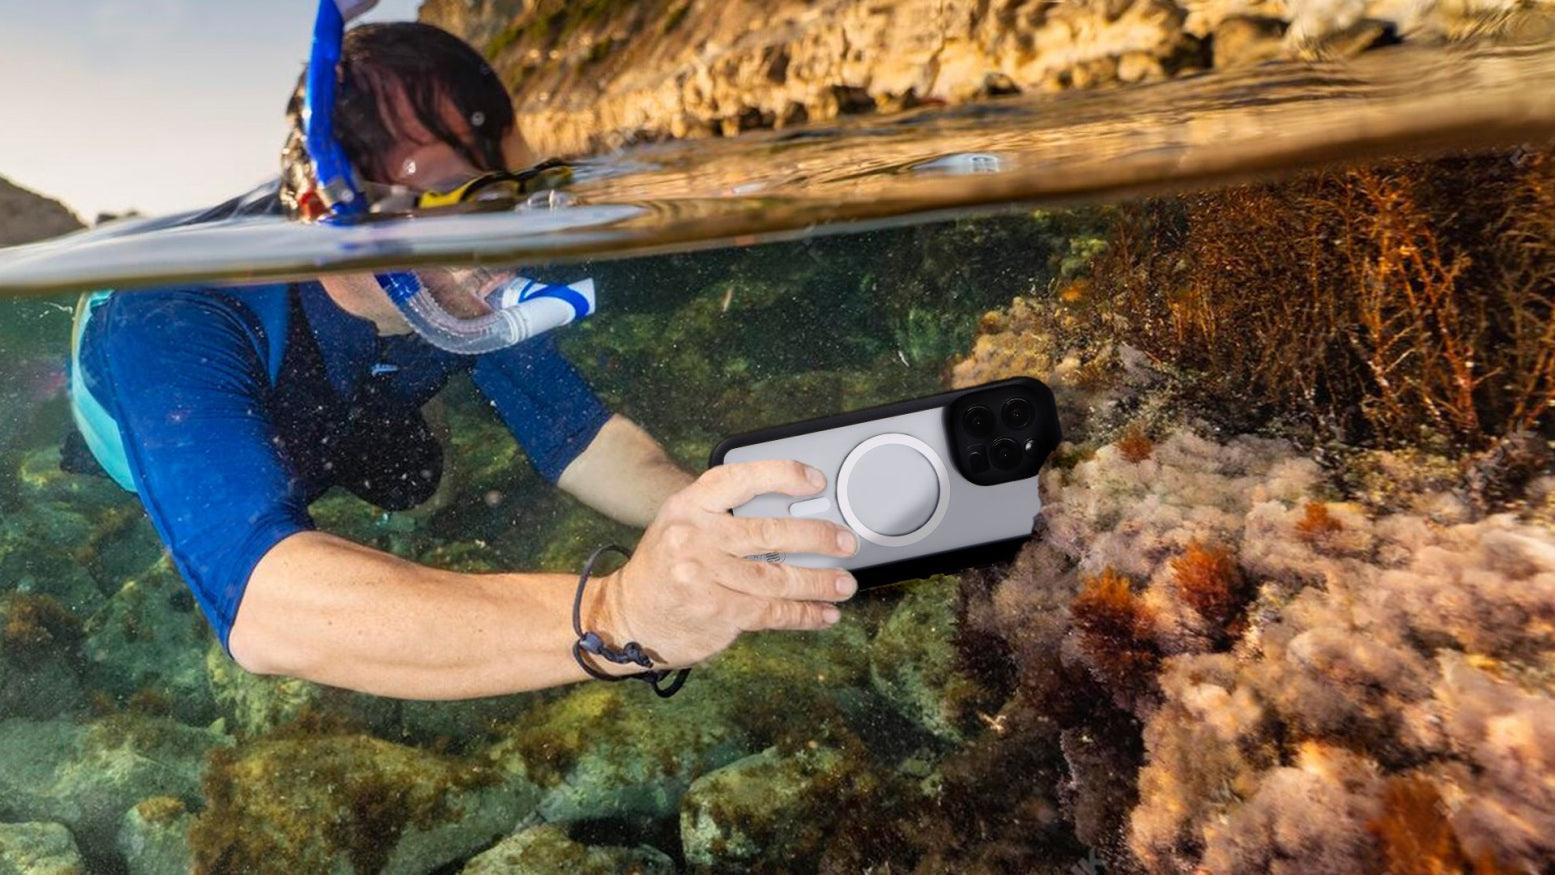 A diver takes pictures in the water with an iphone 15 pro max equipped with a waterproof phone case